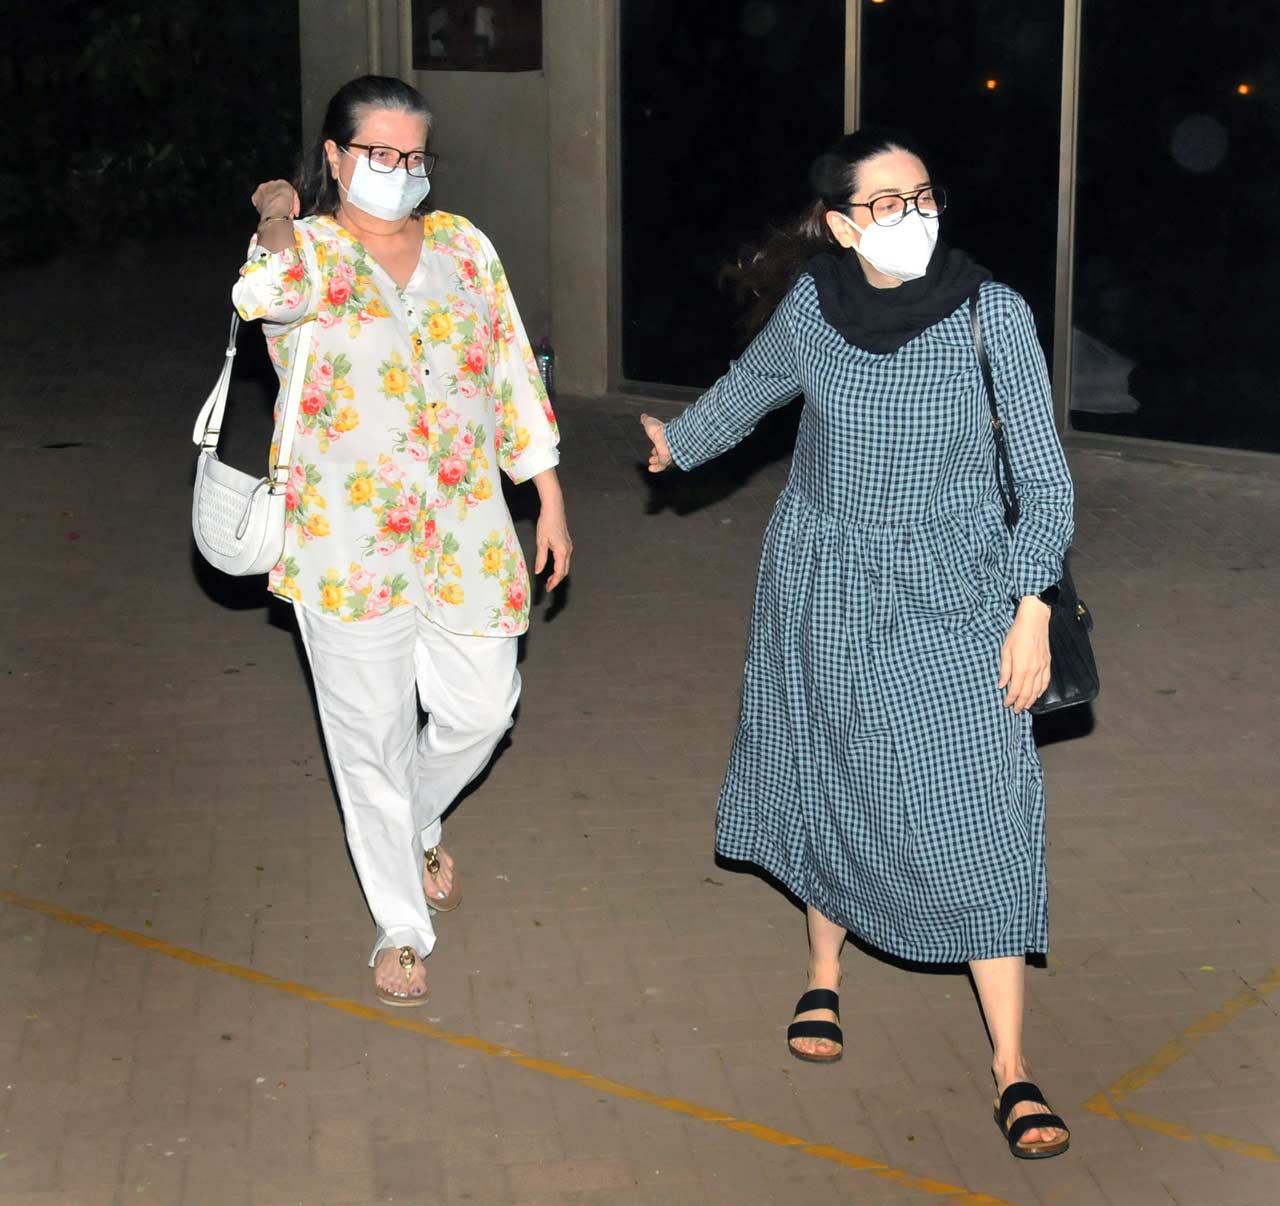 Karisma Kapoor, who recently made her comeback with Mentalhood was snapped with her mother Babita in Bandra.